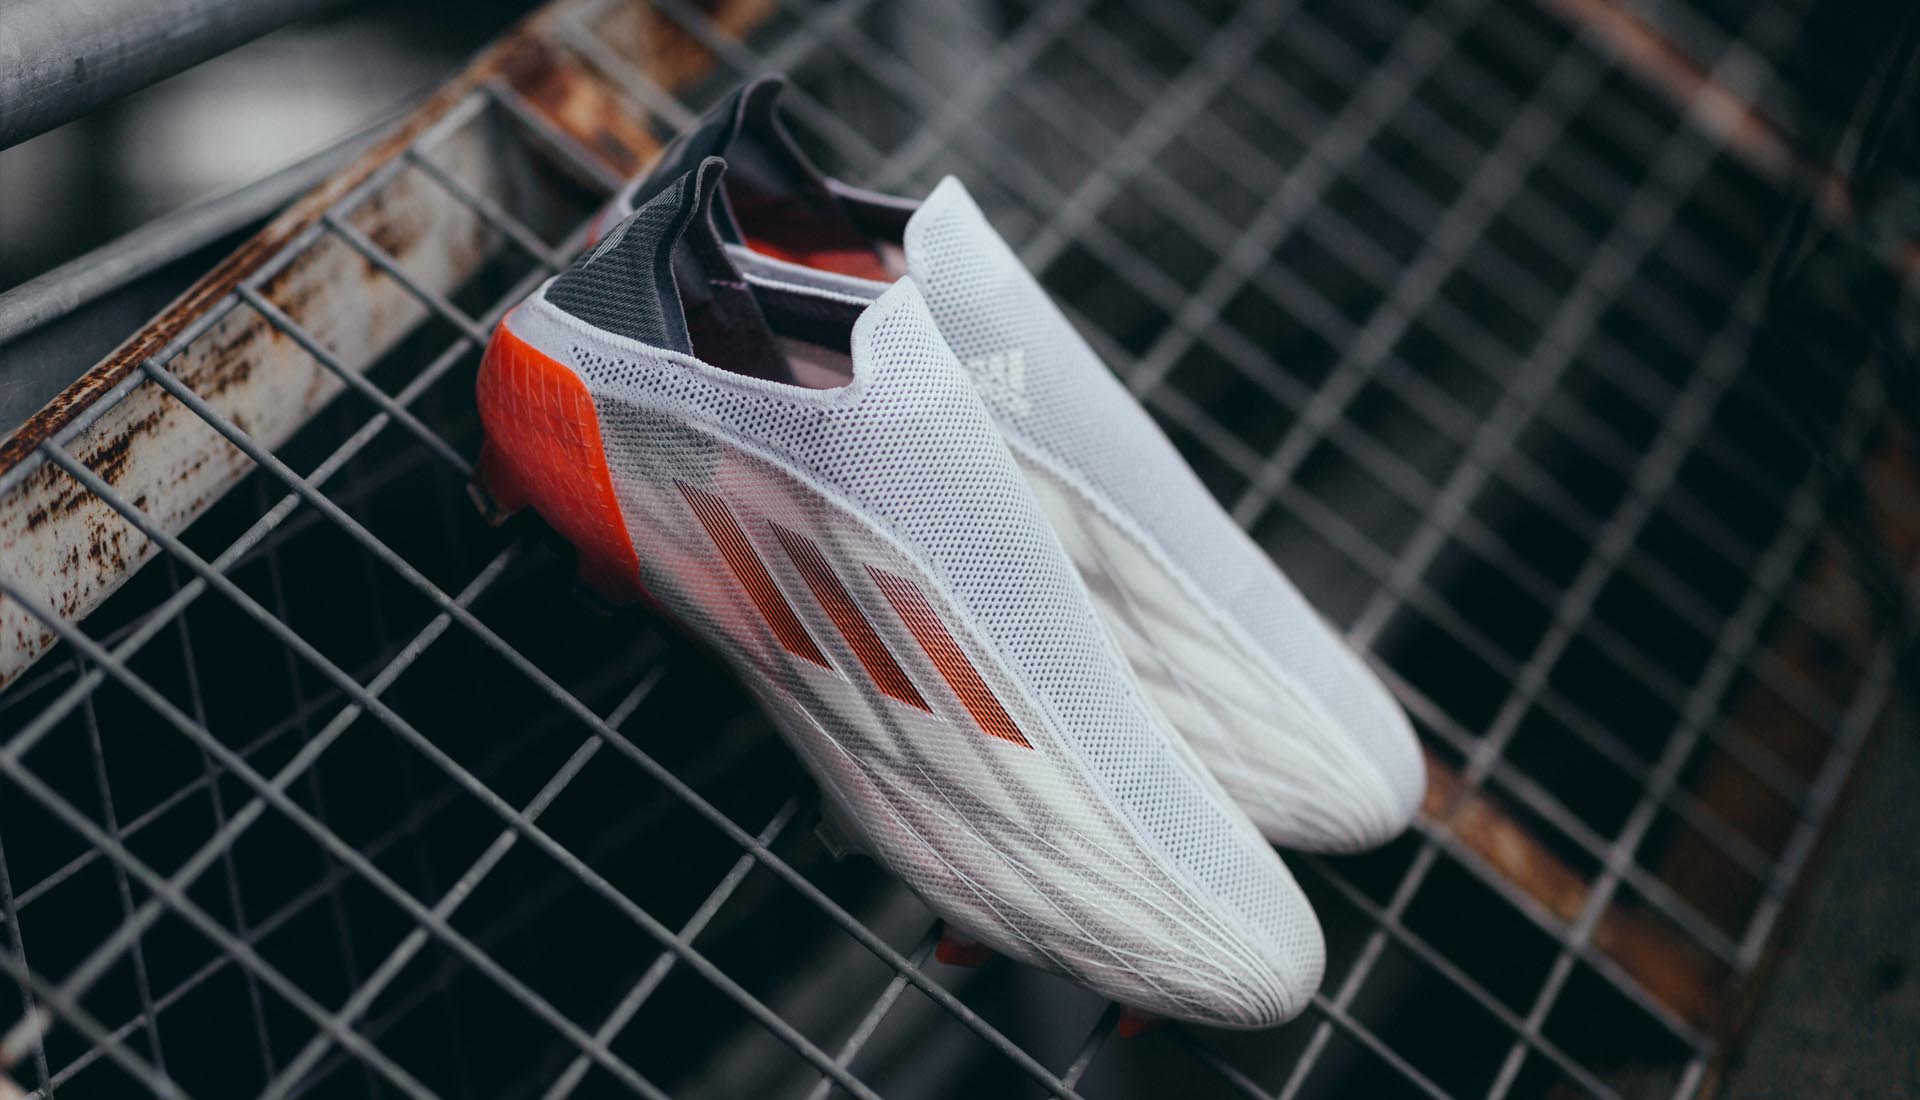 adidas Launch The White Spark Pack - SoccerBible